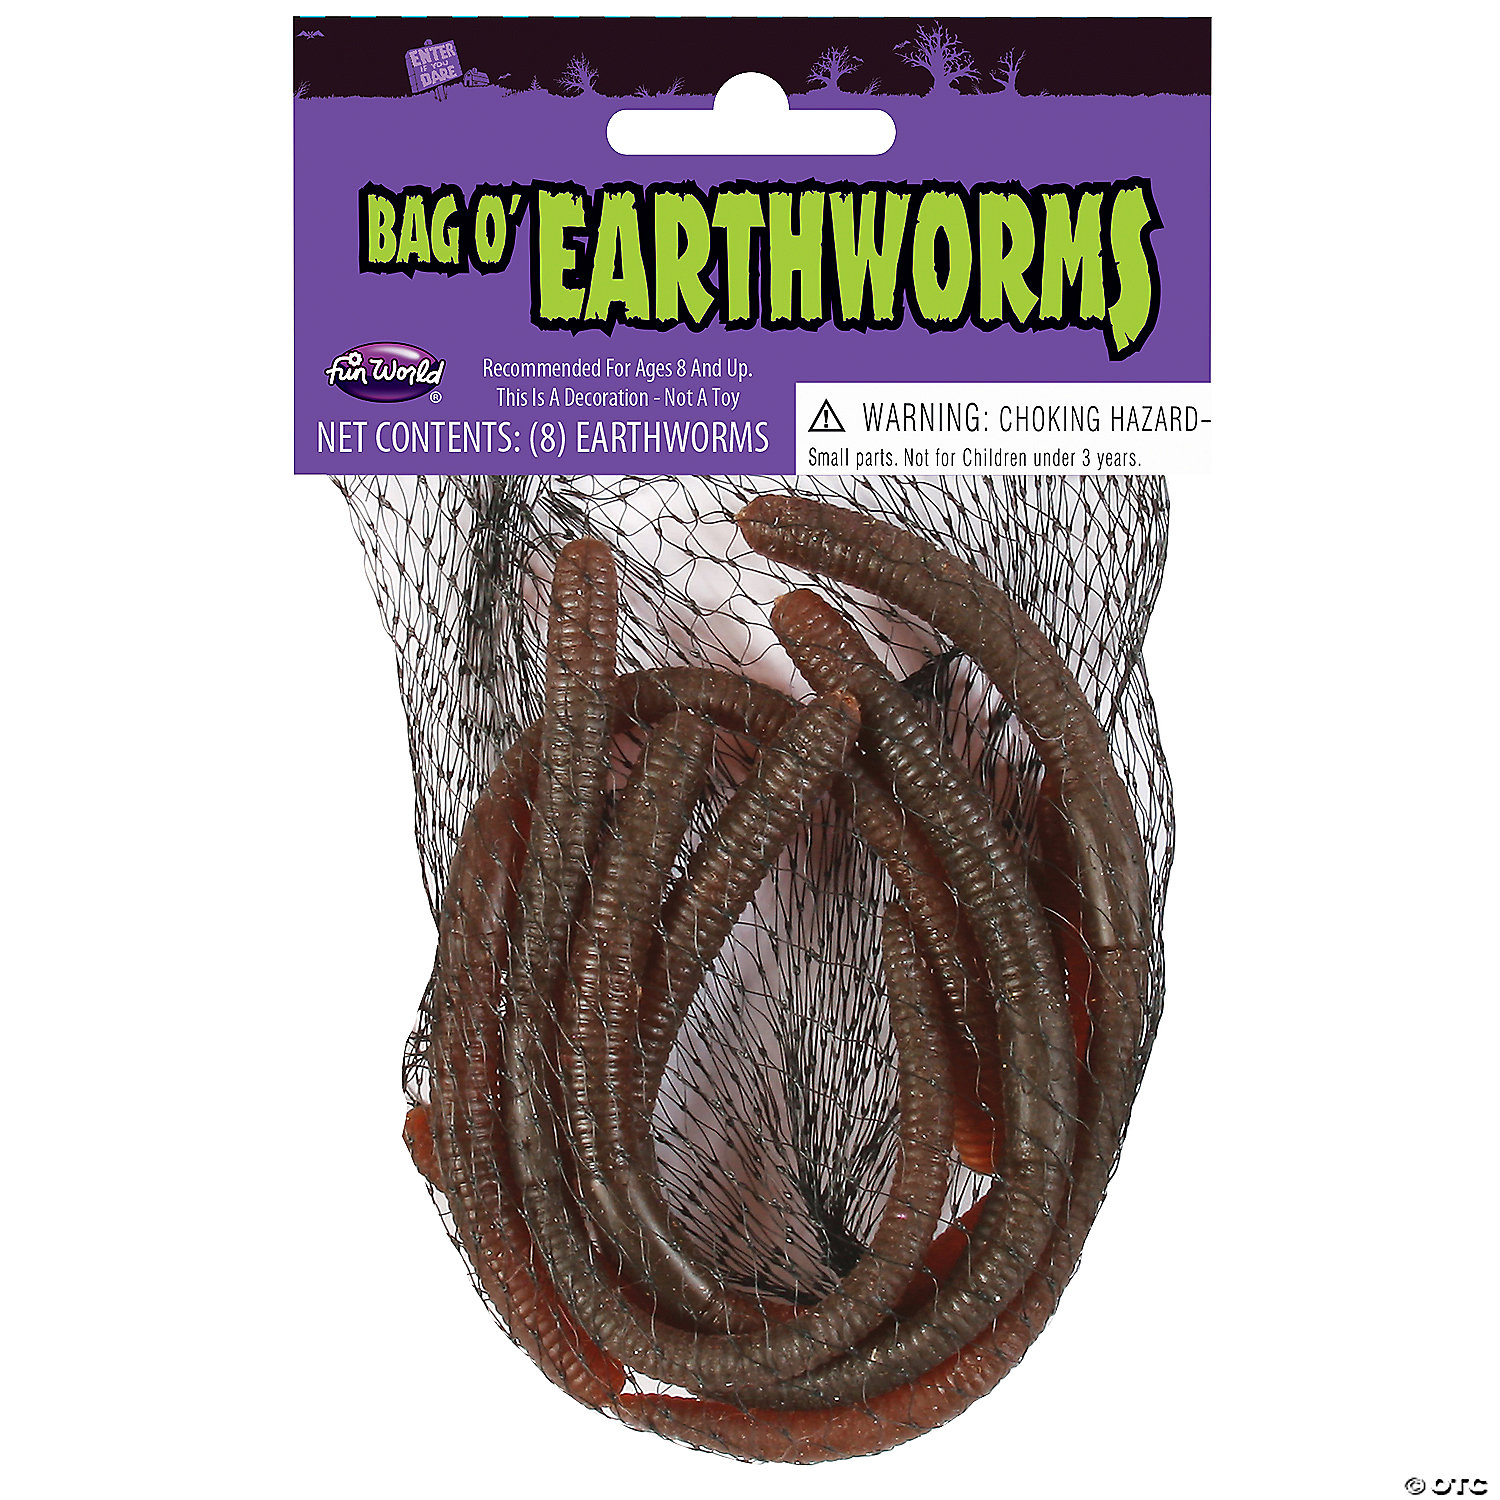 WORMS IN A BAG - HALLOWEEN